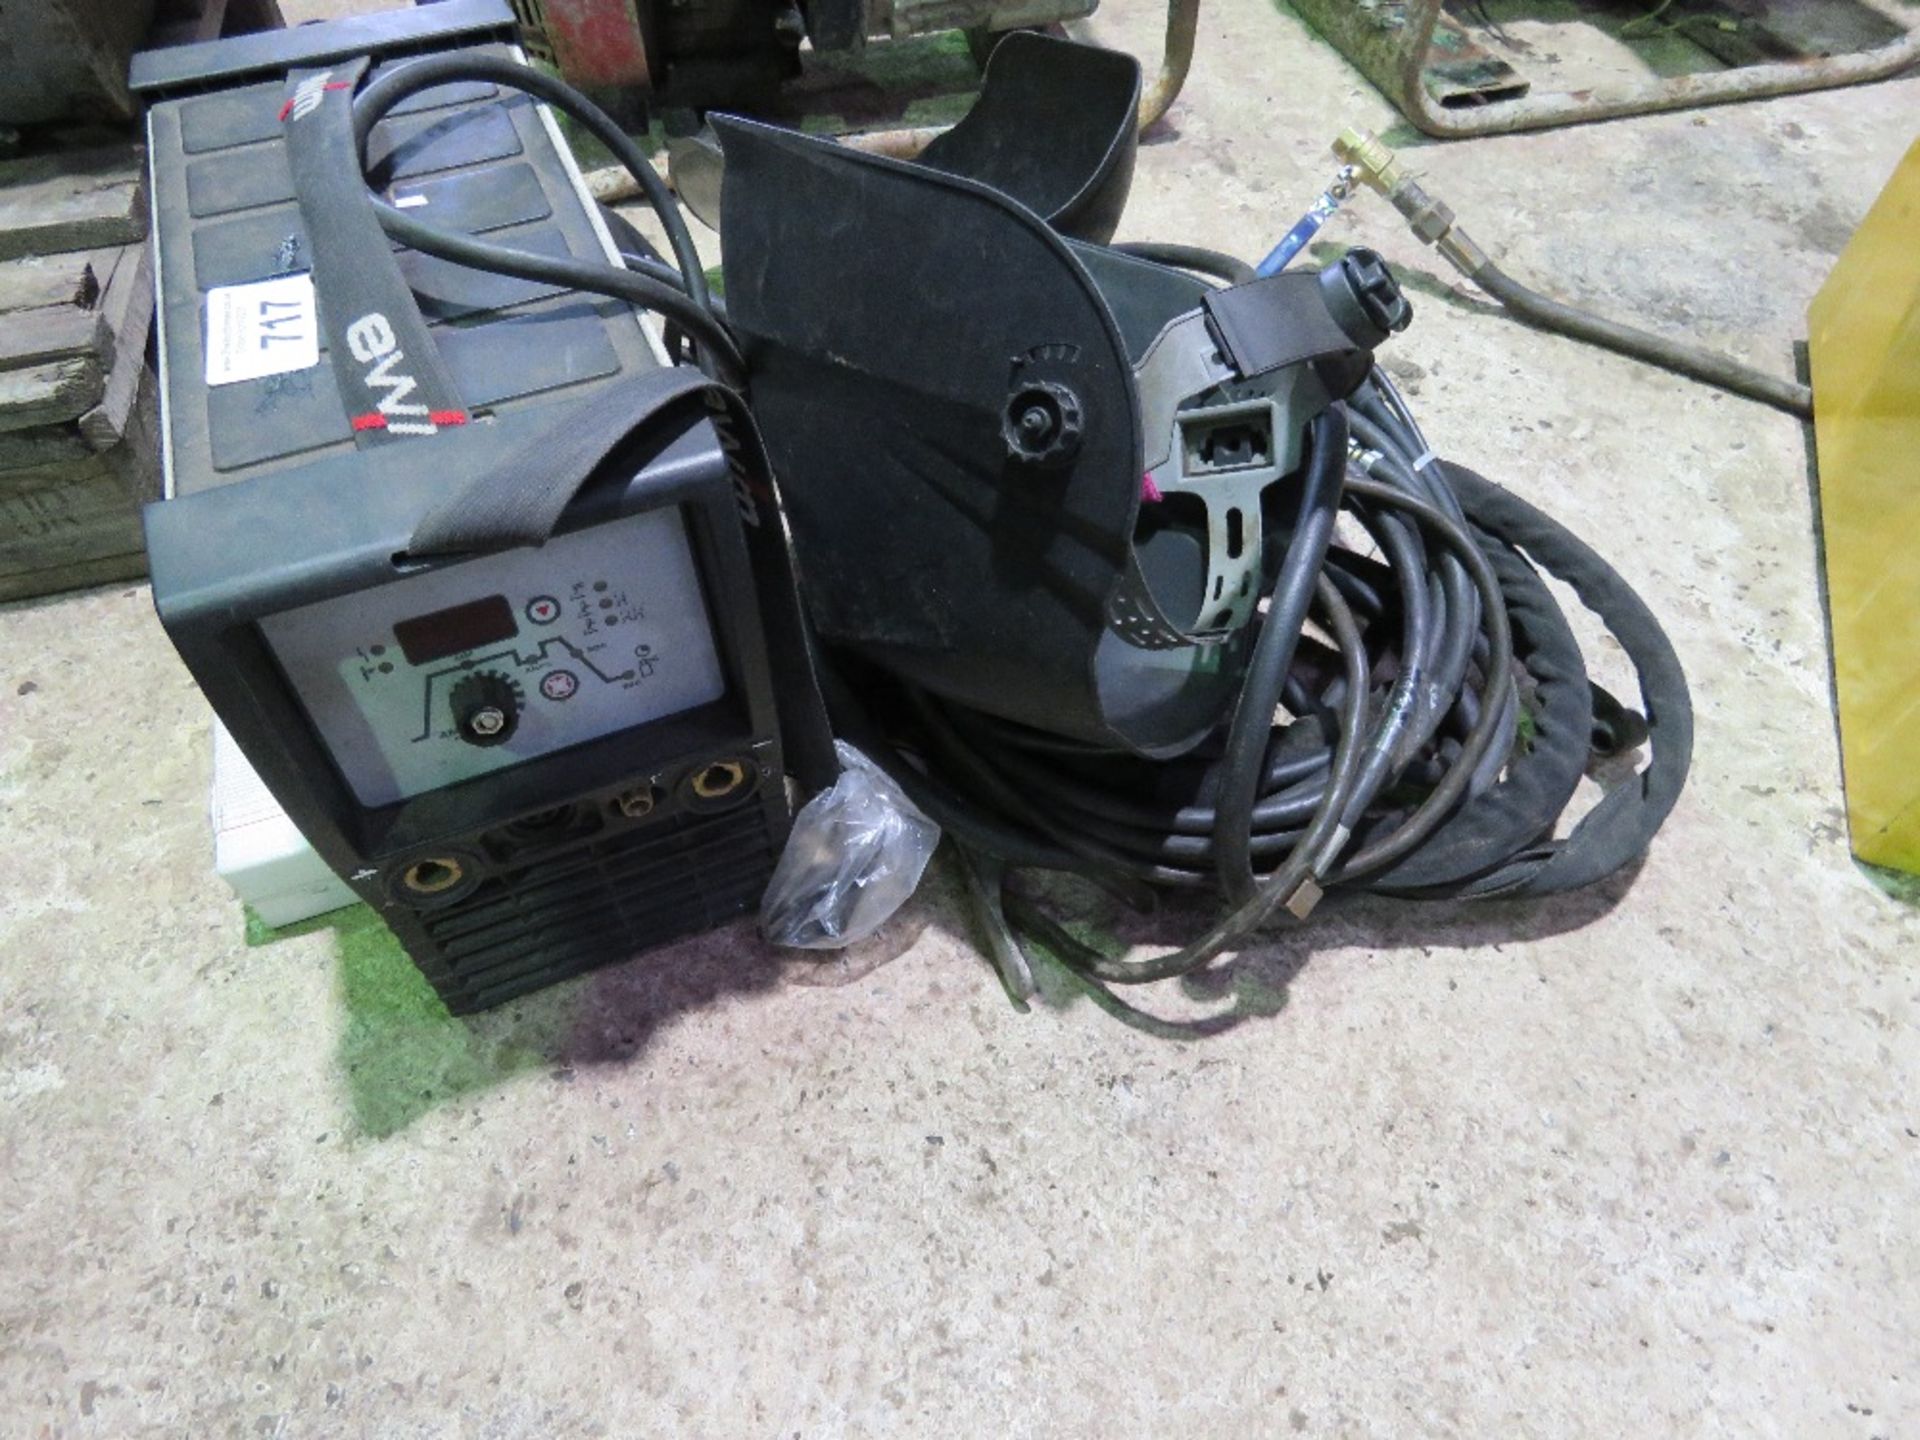 EWN P200 PICOTIG MV WELDER, 110VOLT WITH RODS PLUS 2 X HELMETS AS SHOWN.....THIS LOT IS SOLD UNDER T